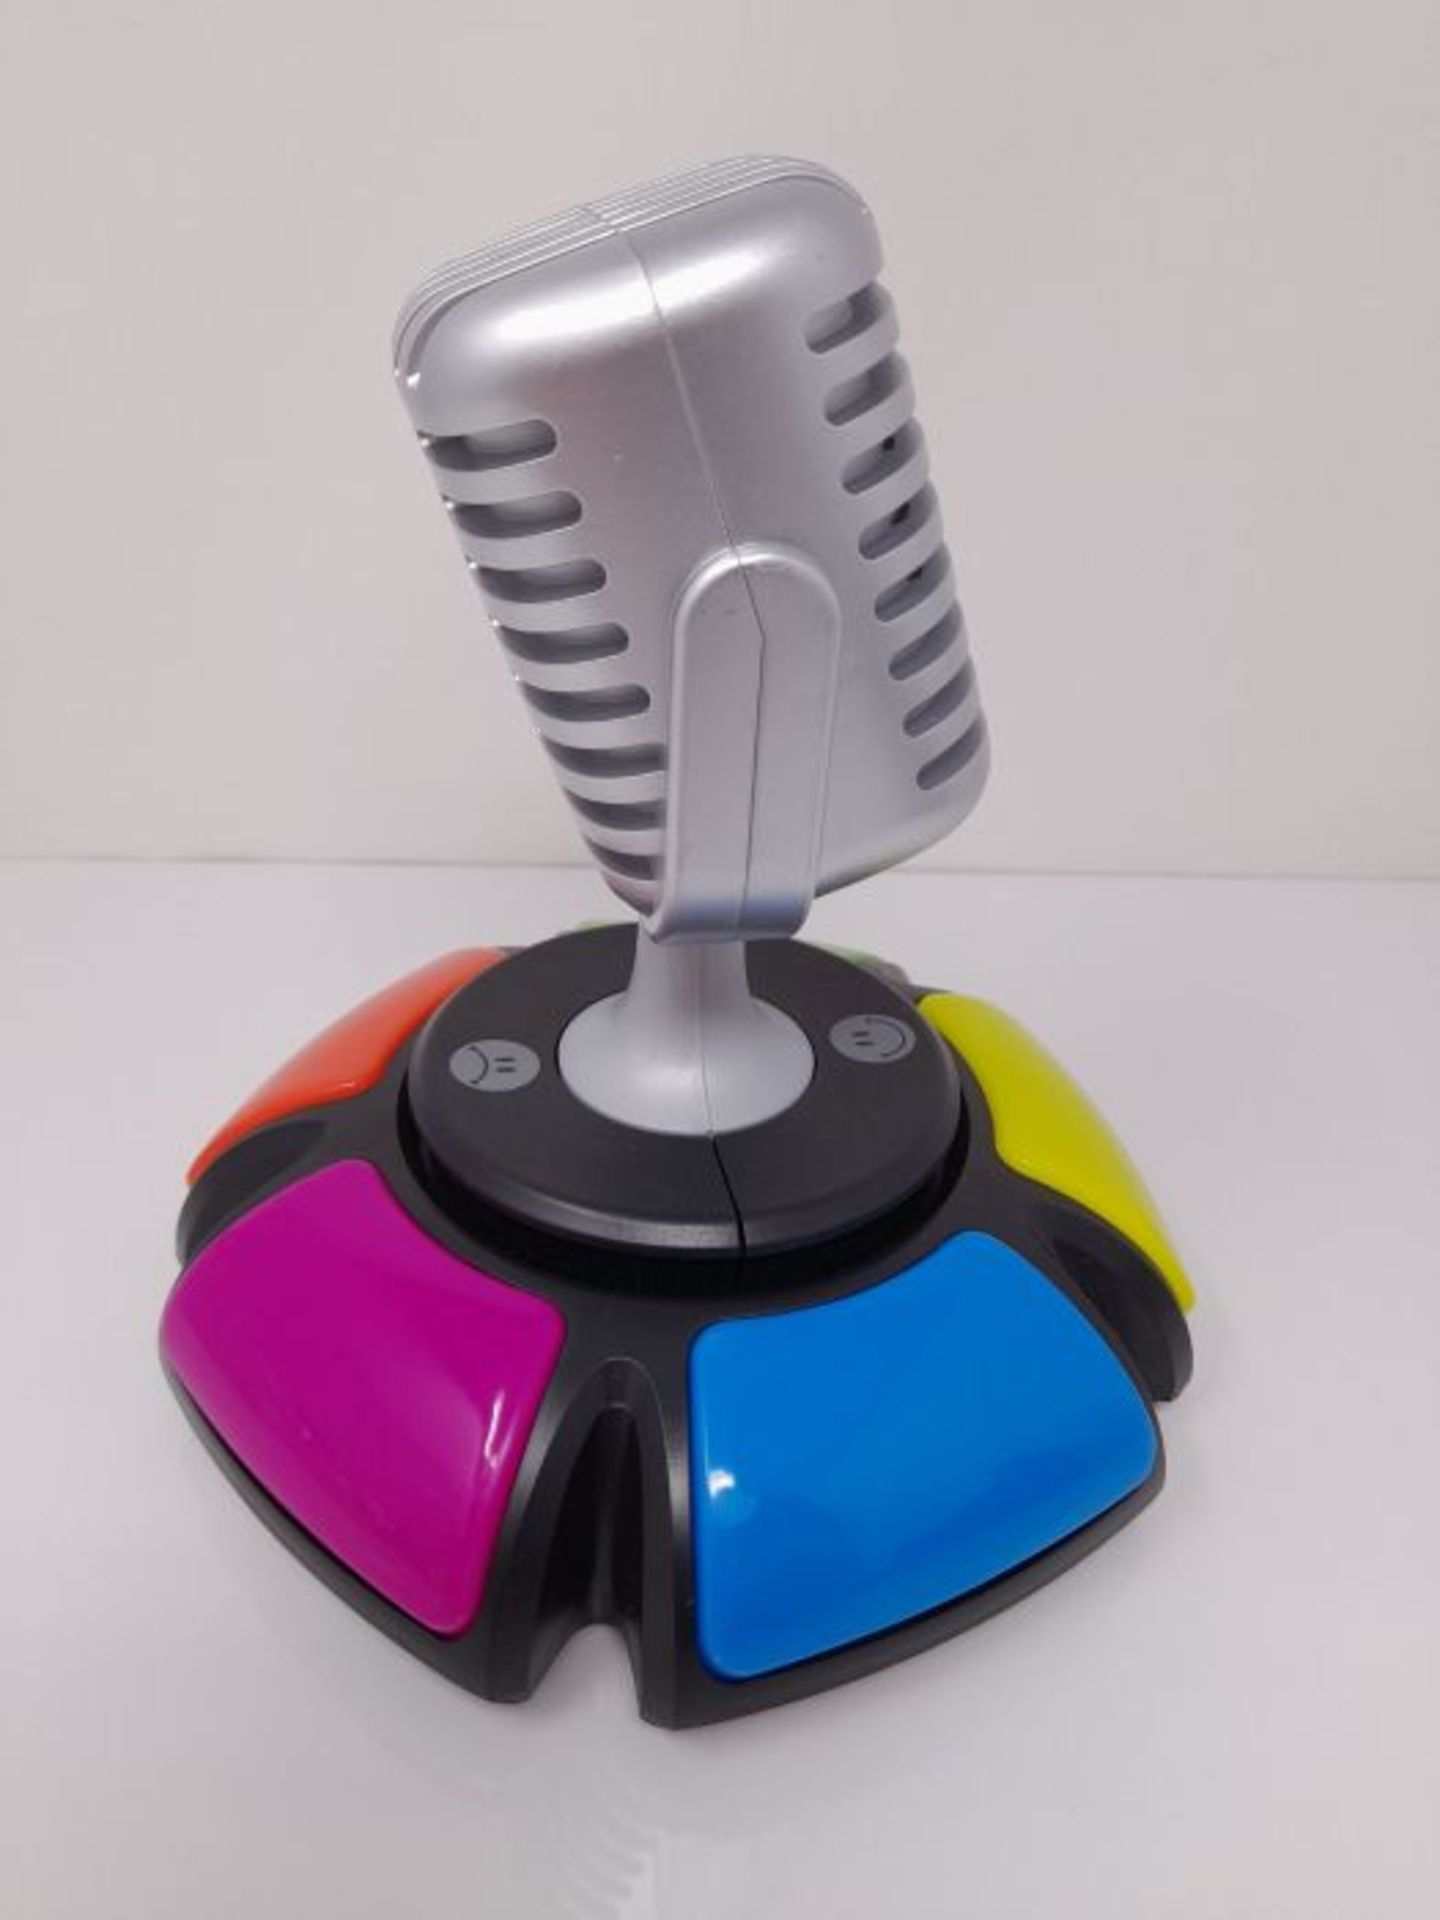 HUTTER Trade 061829 Sound Jack Acoustic Quiz Game, Multi-Colour - Image 3 of 3